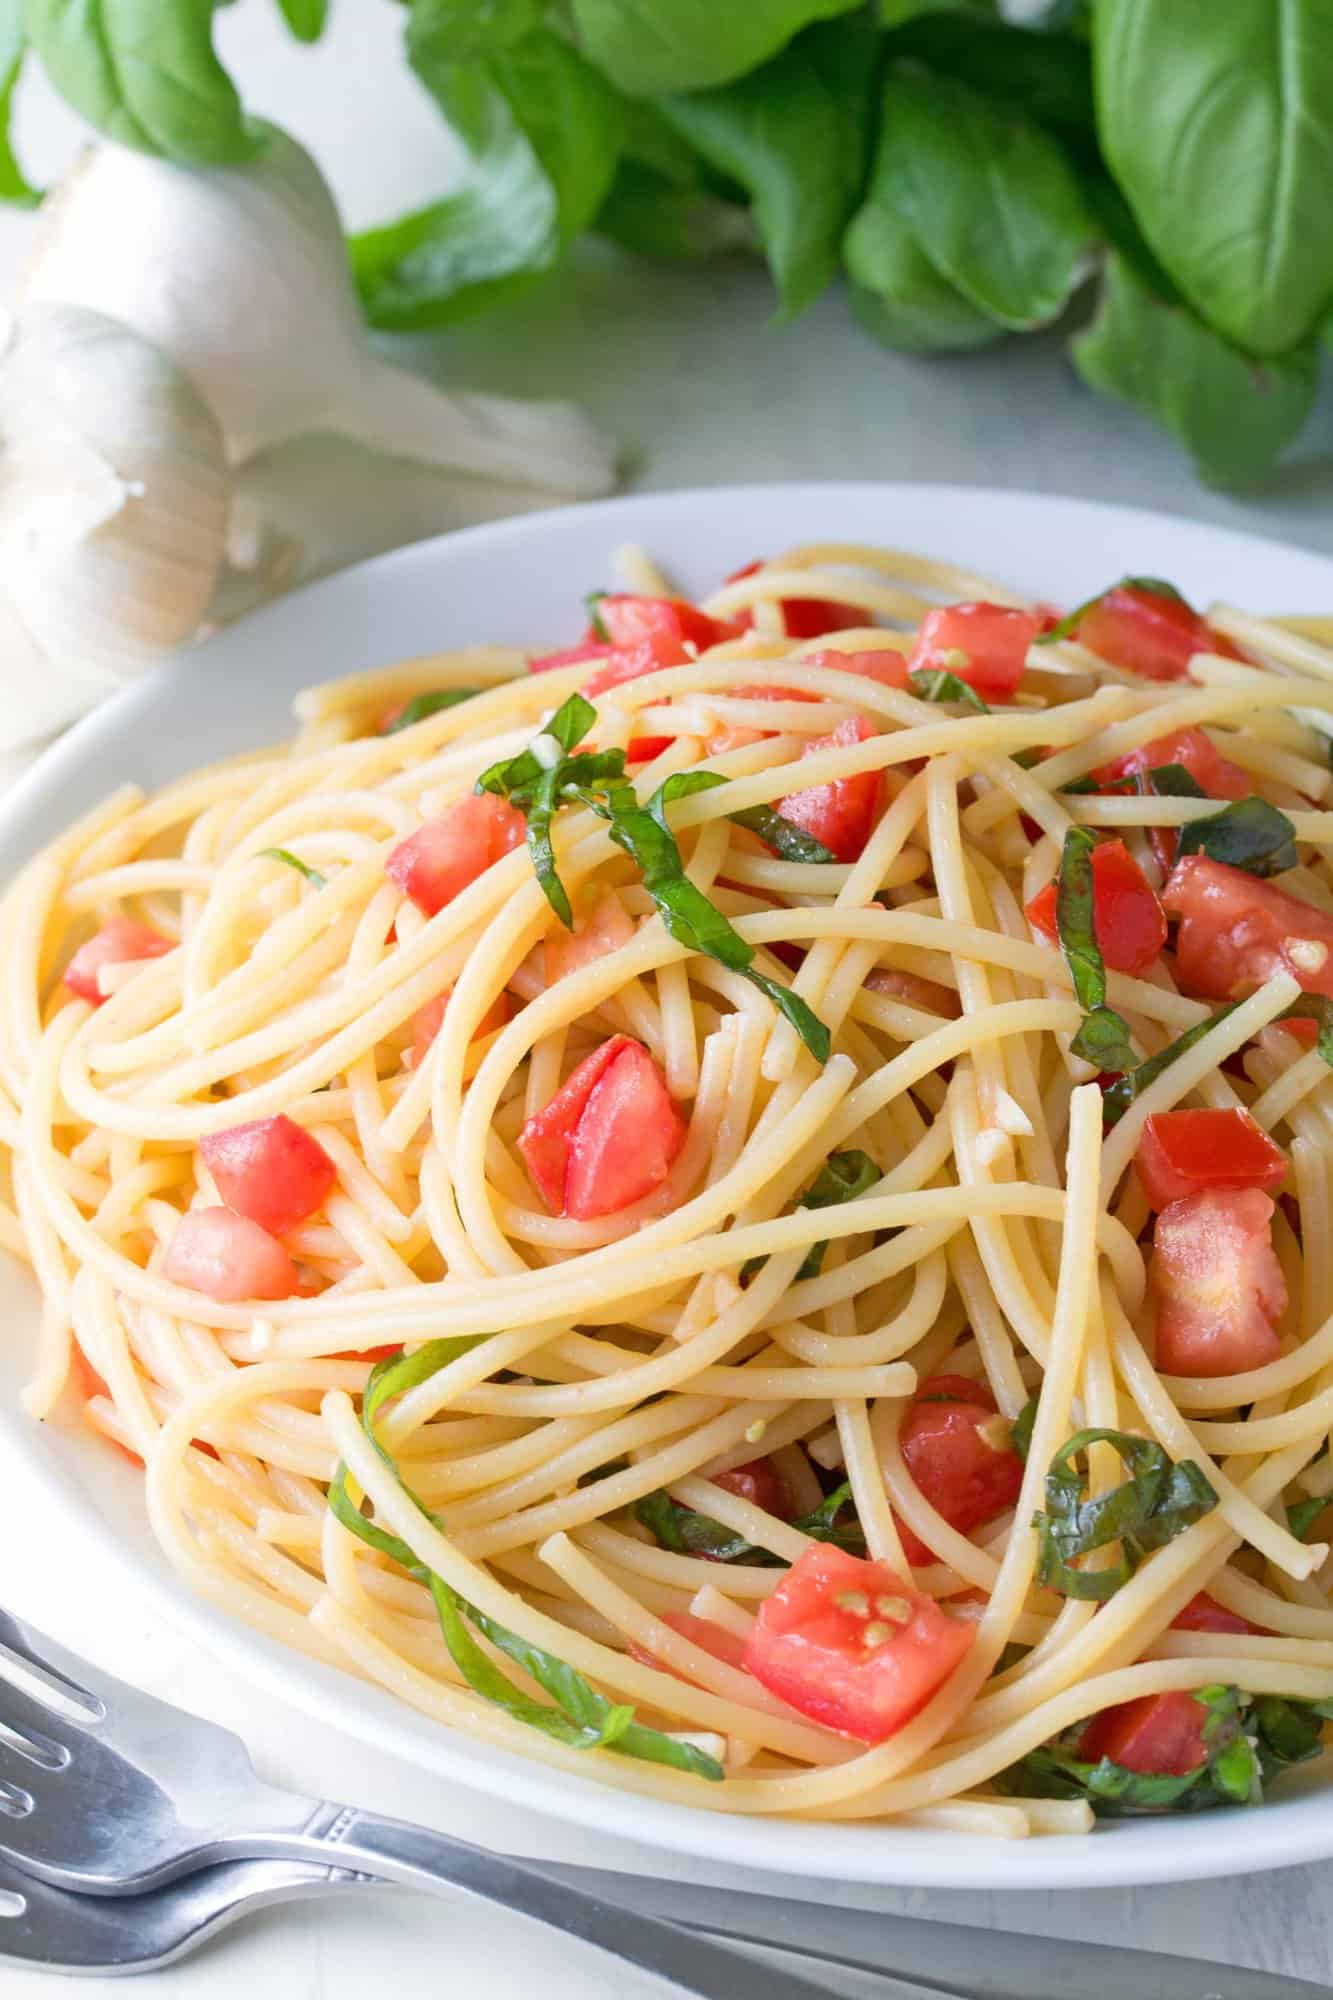 This fresh summer pasta can be eaten hot or cold and comes together in just minutes. It's 15 Minute Summer Garden Pasta and it's amazingly delicious!